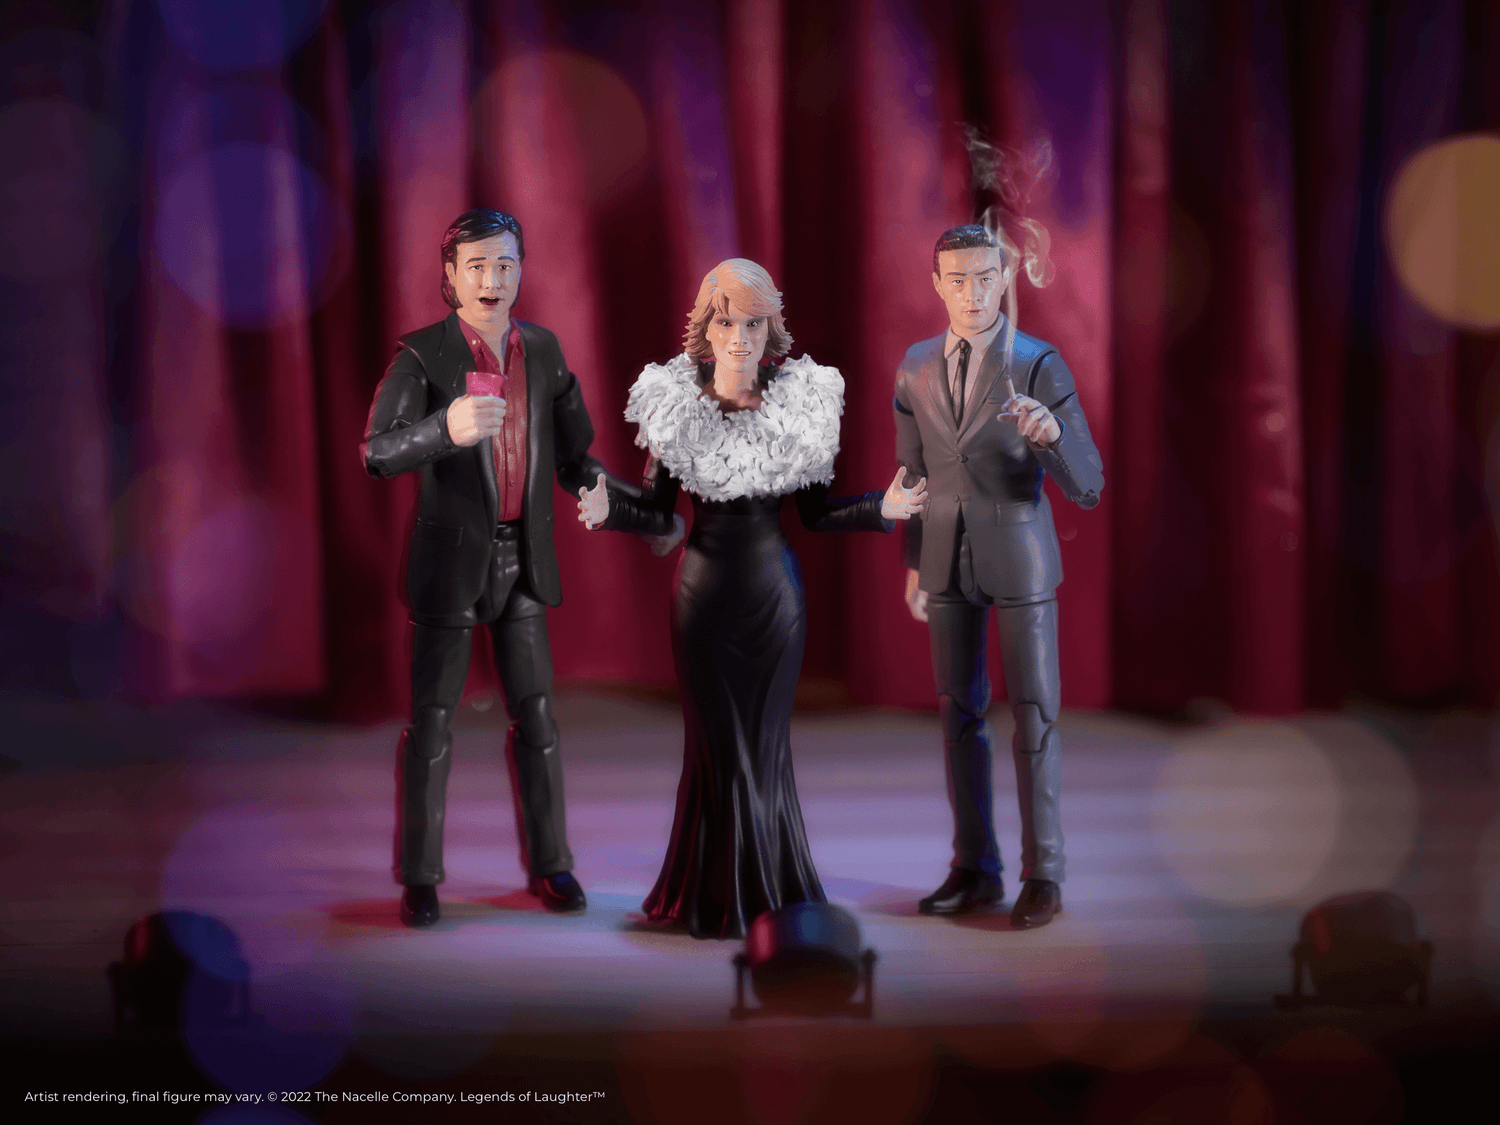 bill hicks joan rivers lenny bruce figurines on stage